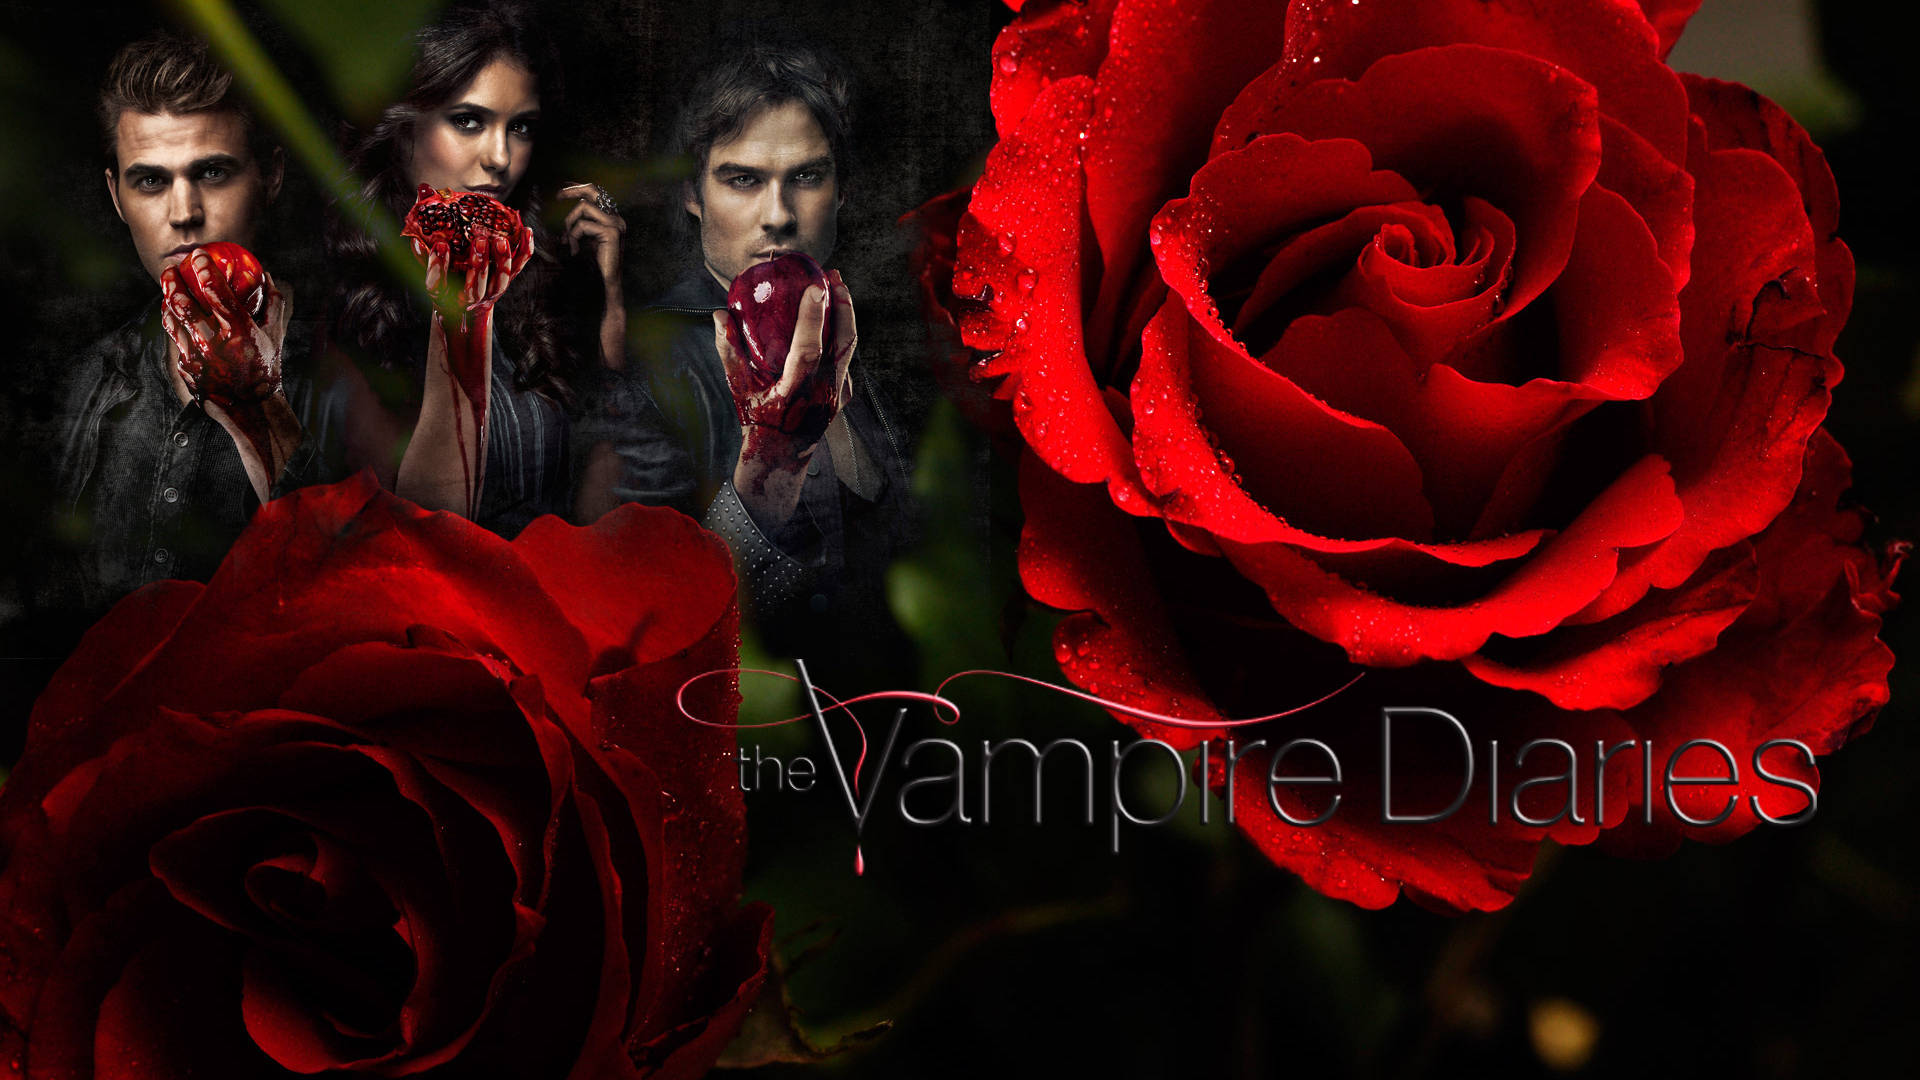 The Vampire Diaries Poster With Red Roses